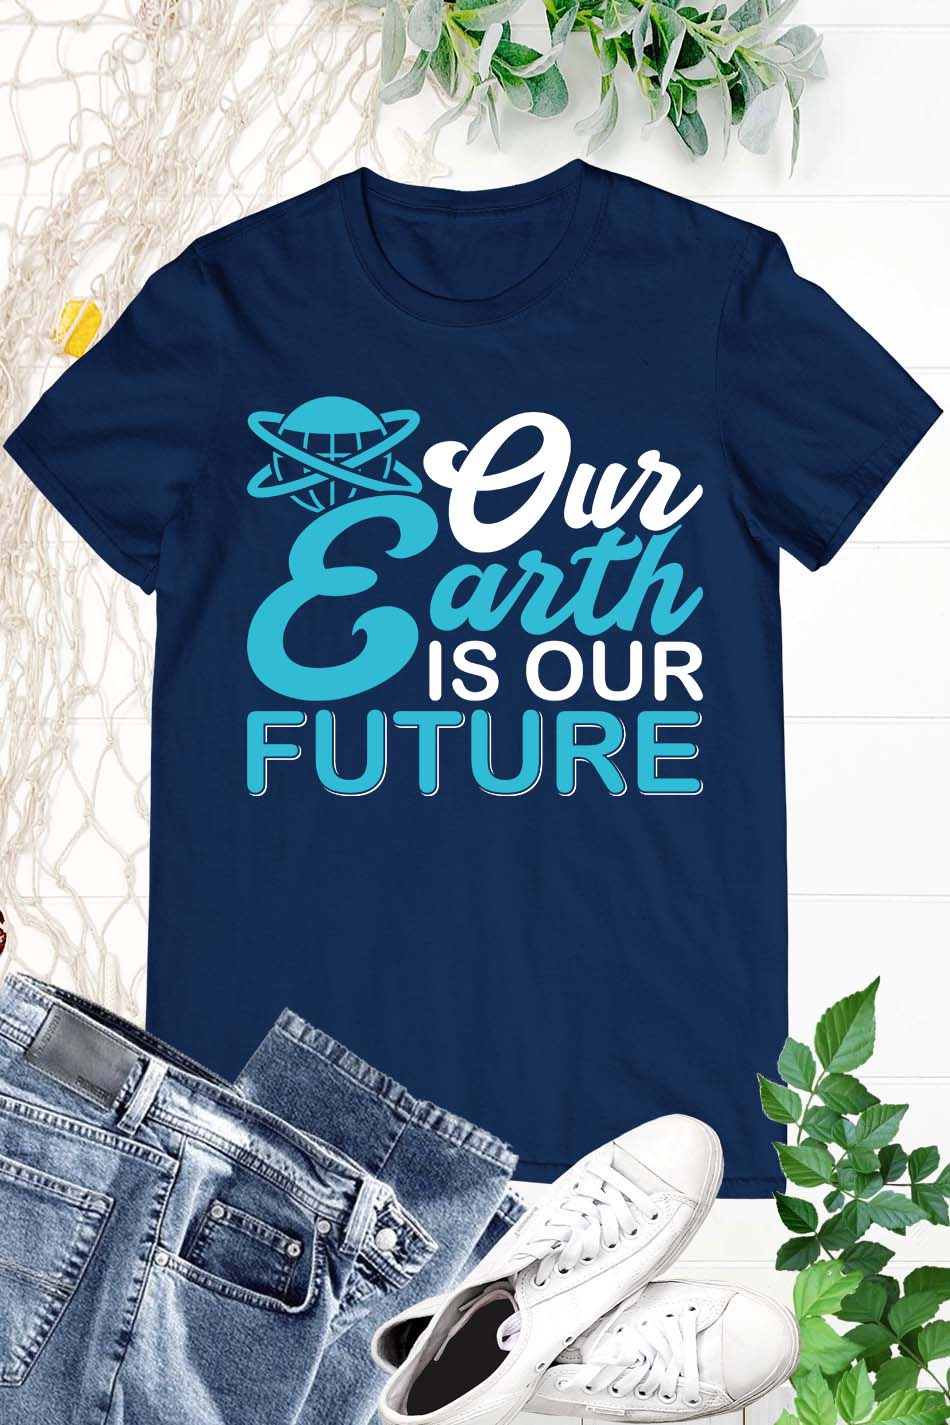 Earth is Our Future Shirt World Peace Tee